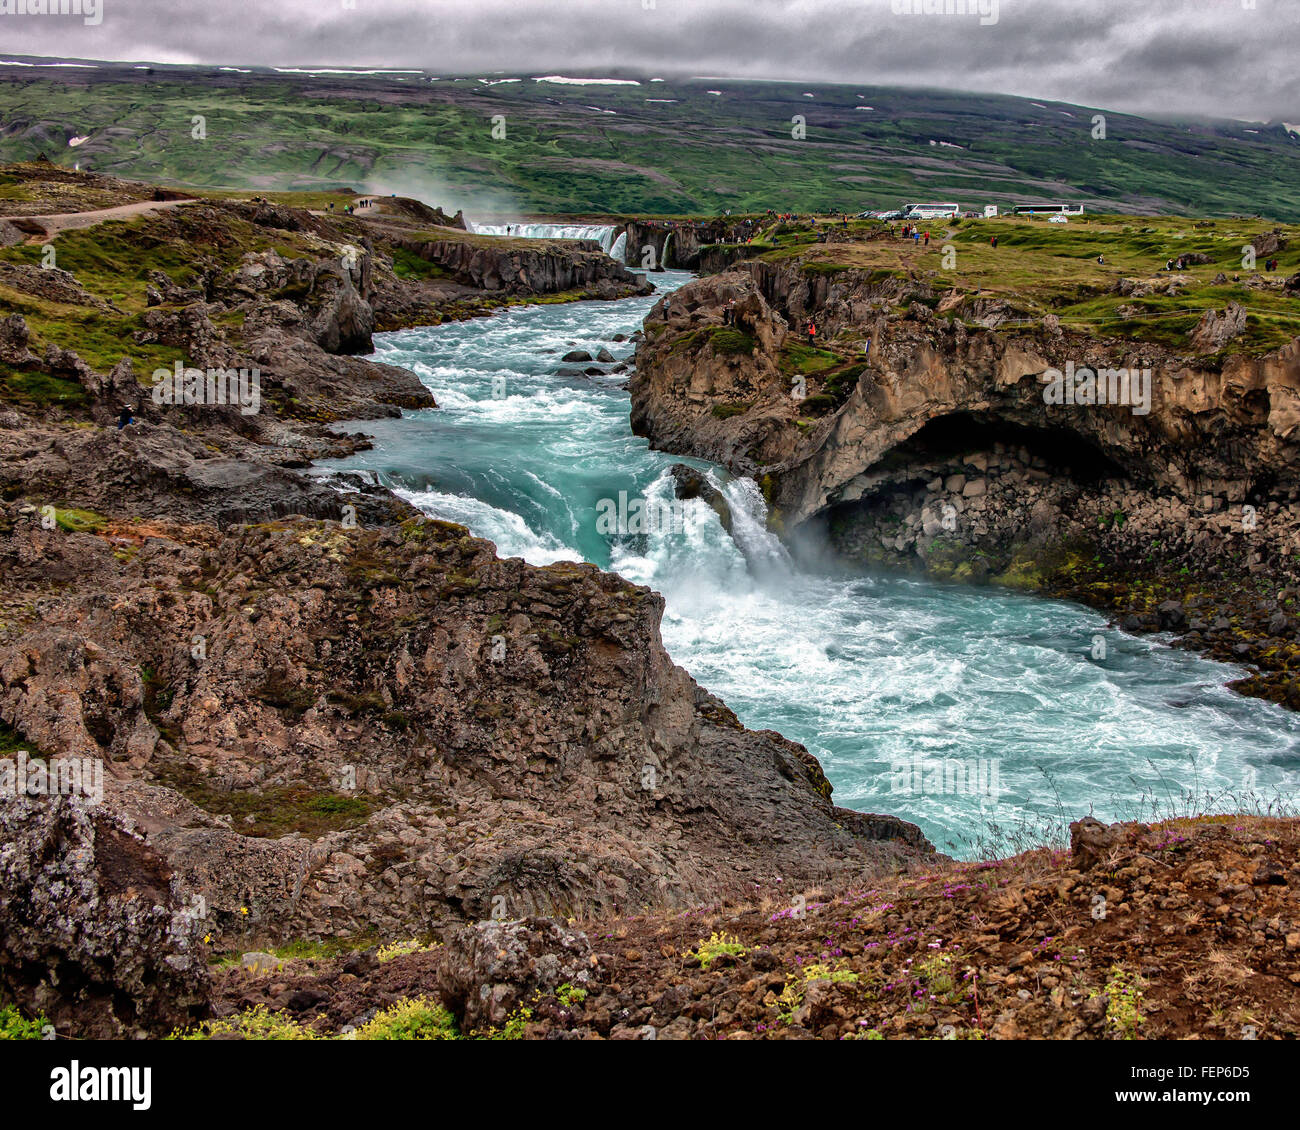 Aug. 1, 2015 - BÃ¡RÃ°Ardalur District, North-Central Iceland, Iceland - Geitafoss is a smaller, but no-less-powerful, waterfall on the SkjÃ¡lfandafljÃ³t river, just downstream from the spectacular, popular, famed GoÃ°afoss falls in the distance. Below the Godafoss falls, the river flows through a narrow cataract 50-75 ft (15-23 m) wide with violent wave action and much froth and spume. Tourism has become a growing sector of the economy and Iceland has become a favorite tourist destination. © Arnold Drapkin/ZUMA Wire/Alamy Live News Stock Photo